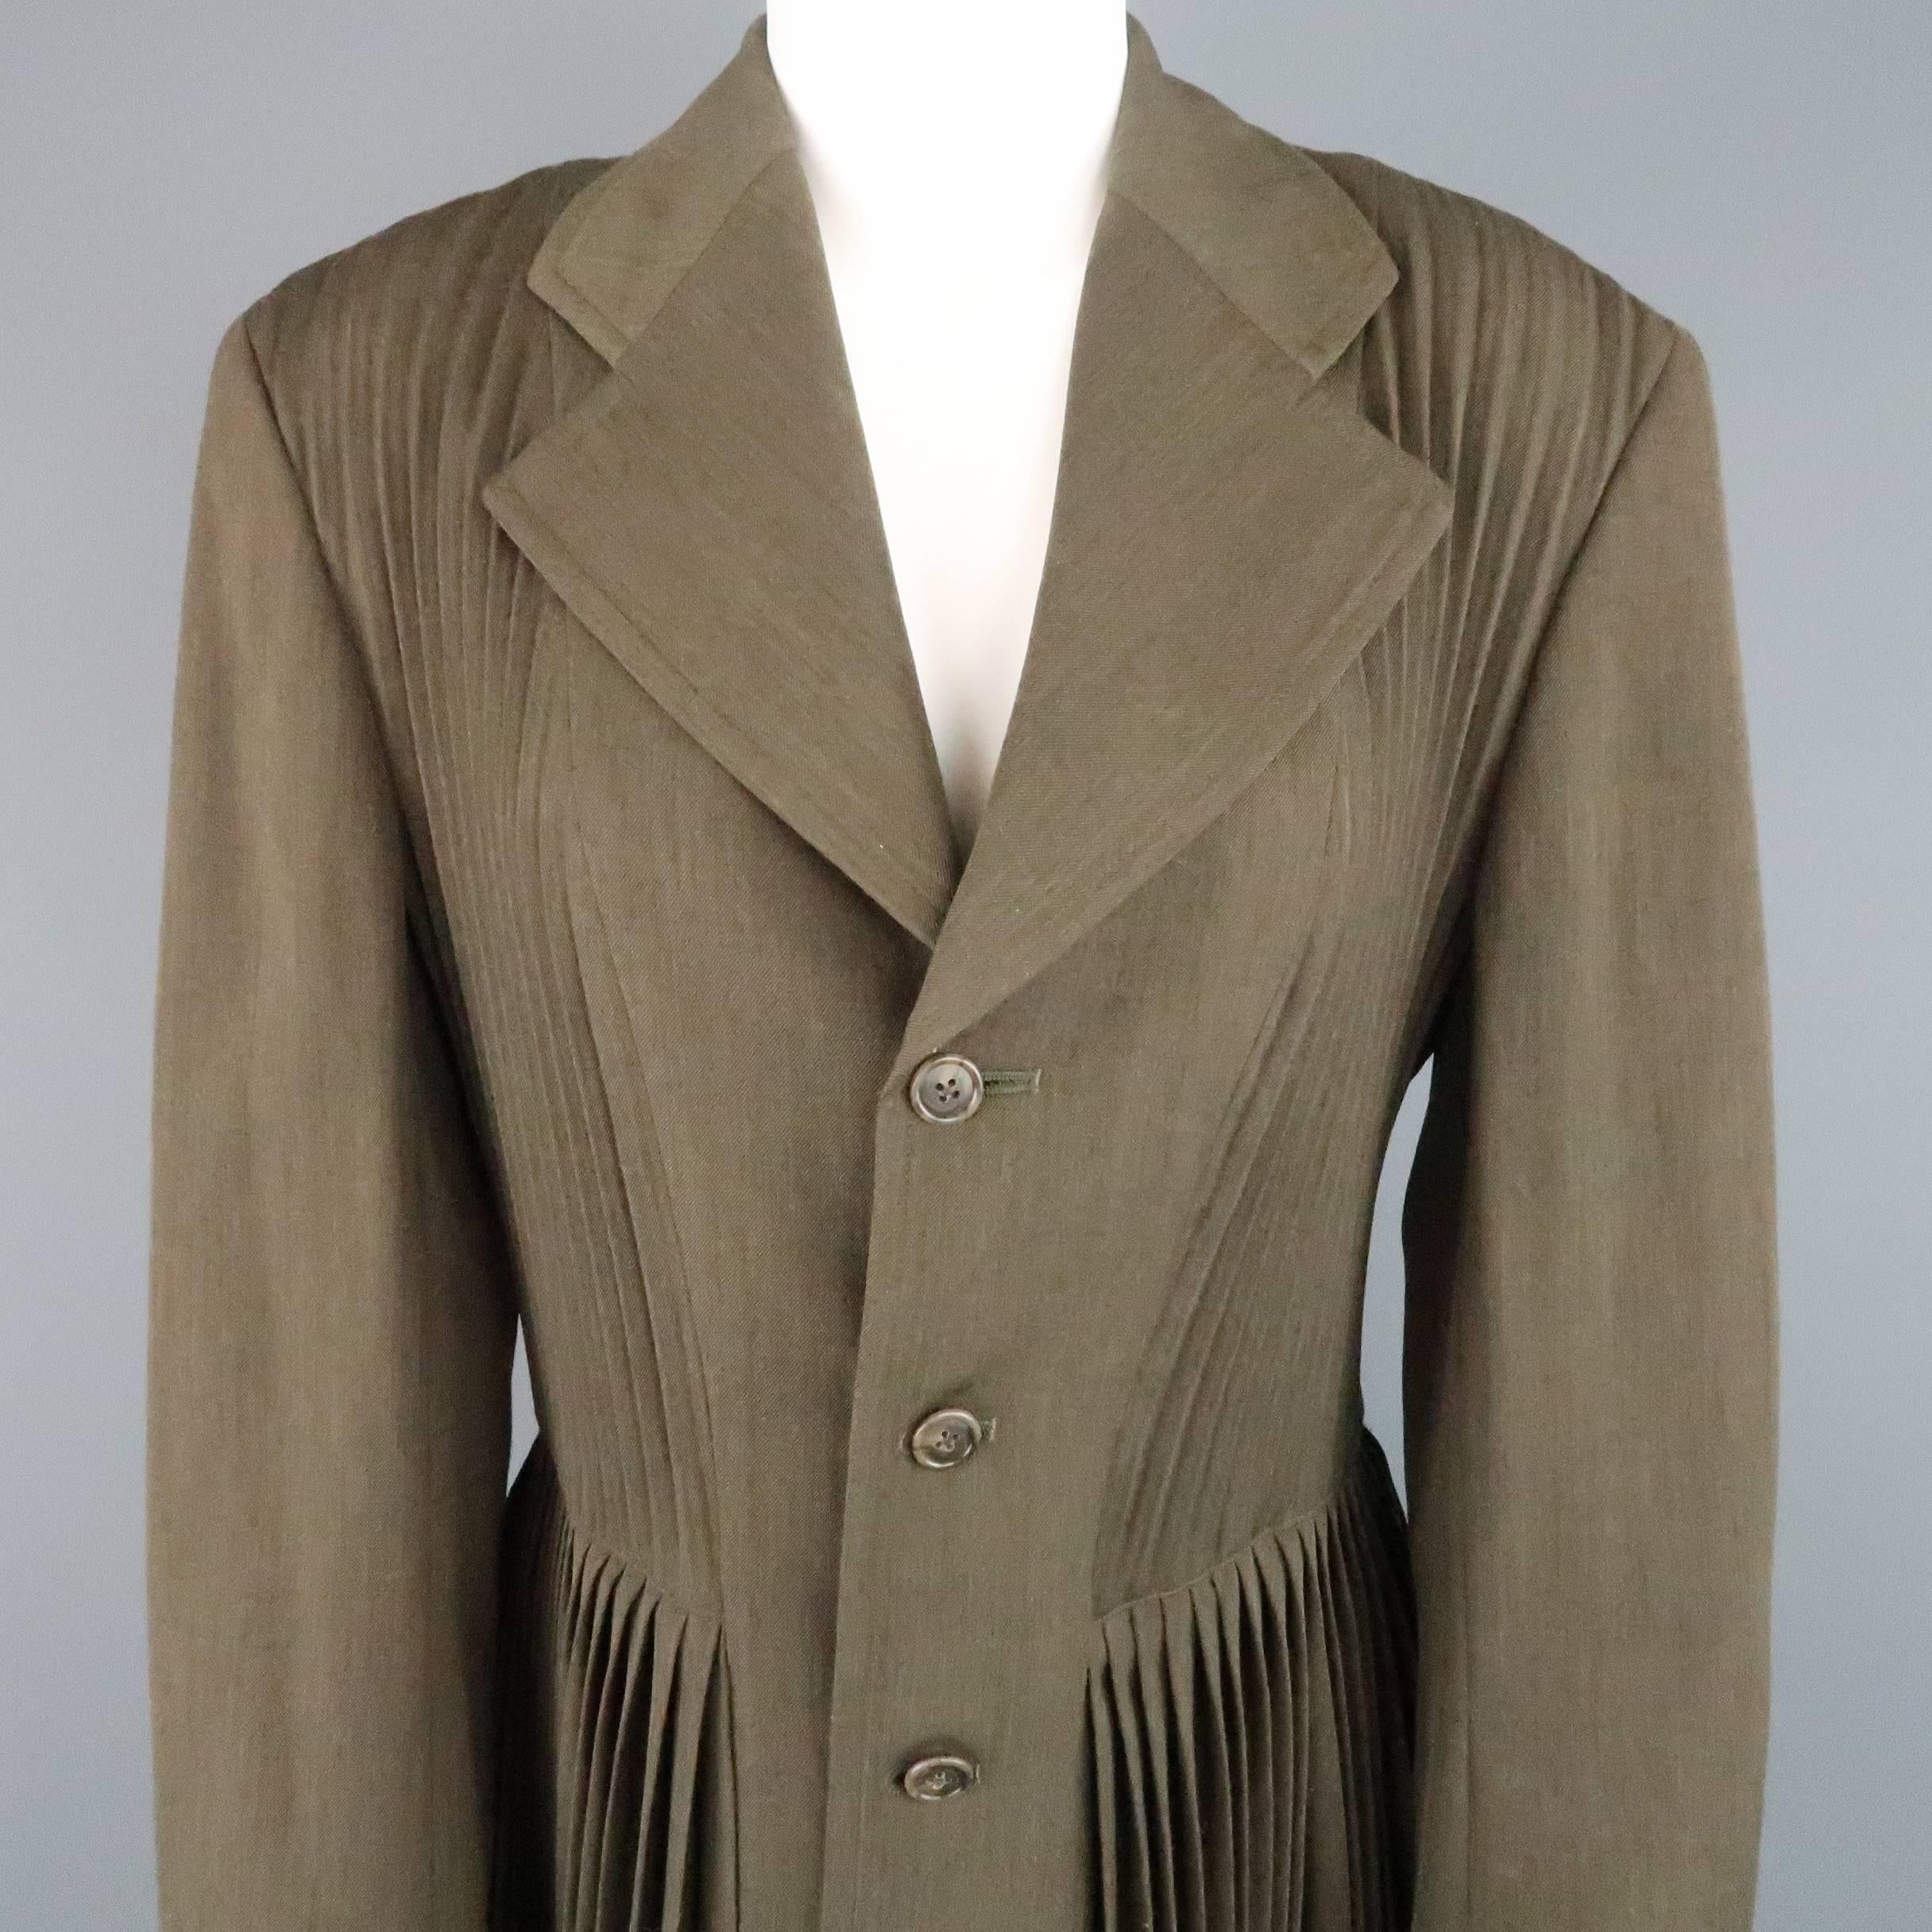 COMME des GARCONS sport coat jacket comes in an olive green wool blend and features a wide notch lapel, four button front, pleat textured top, and accordion pleated skirt. Made in Japan.
 
Excellent Pre-Owned Condition.
Marked: M
 
Measurements:
